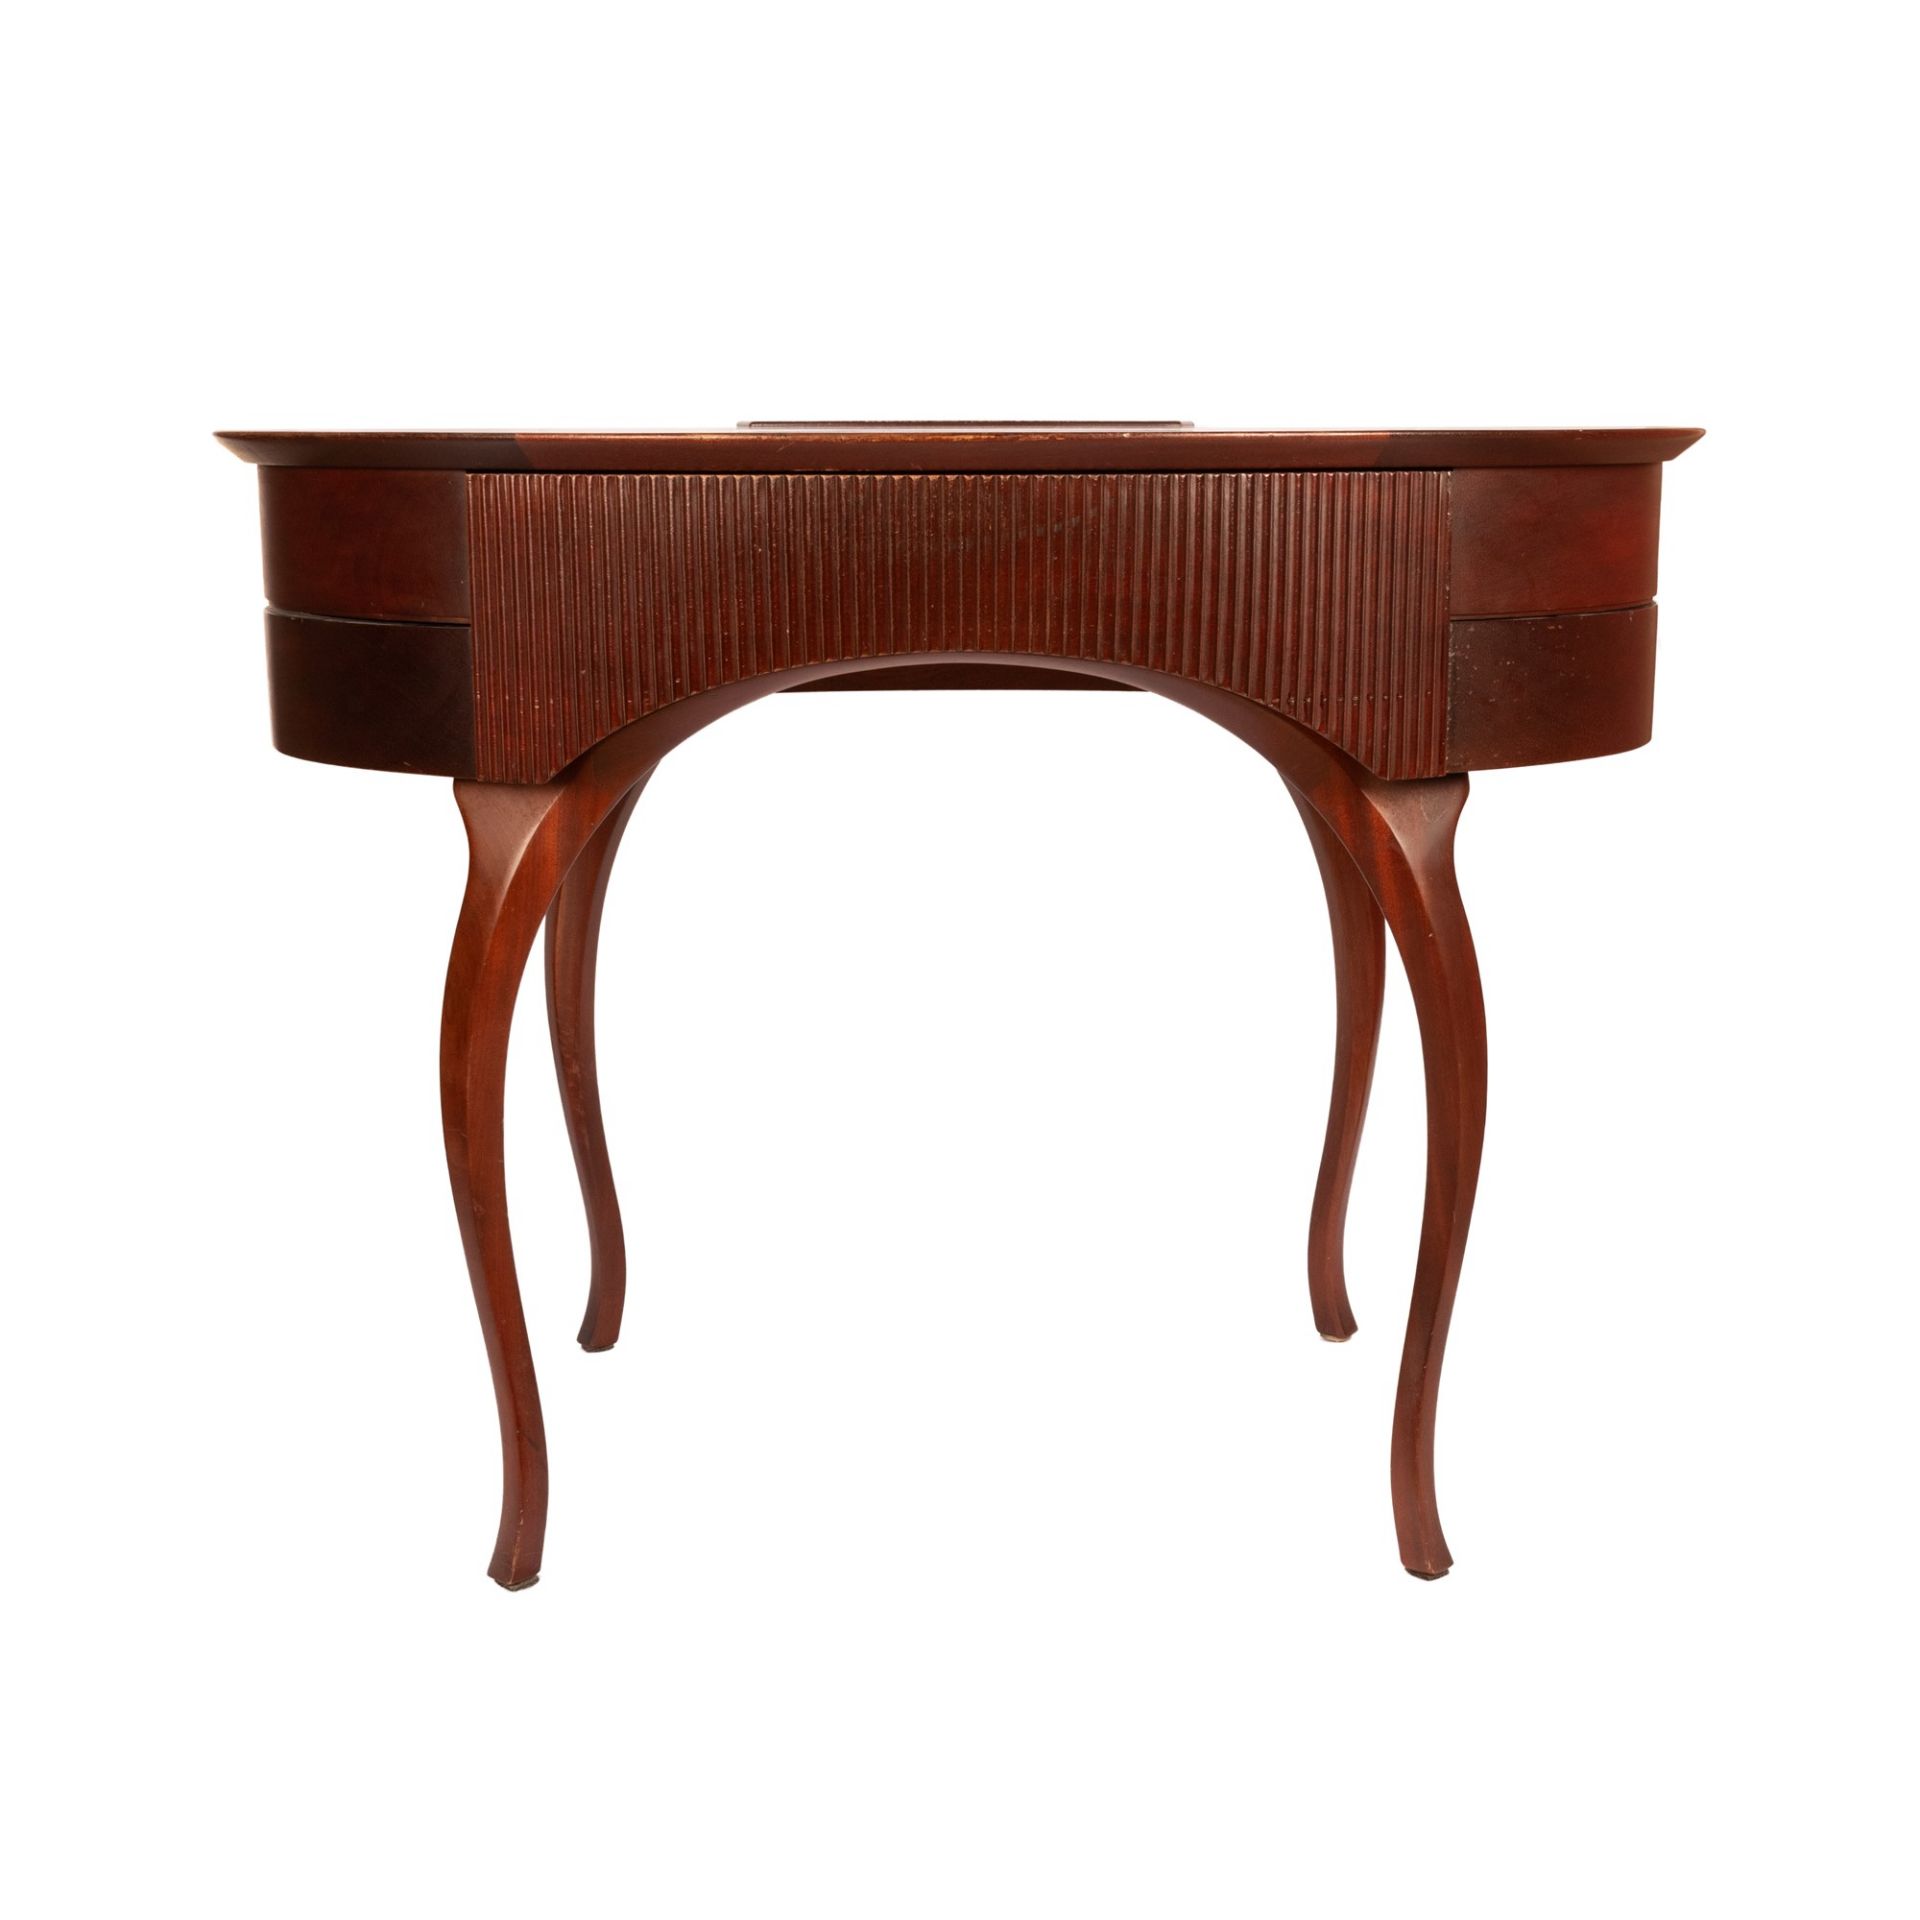 Writing desk in cherry wood - Image 21 of 25